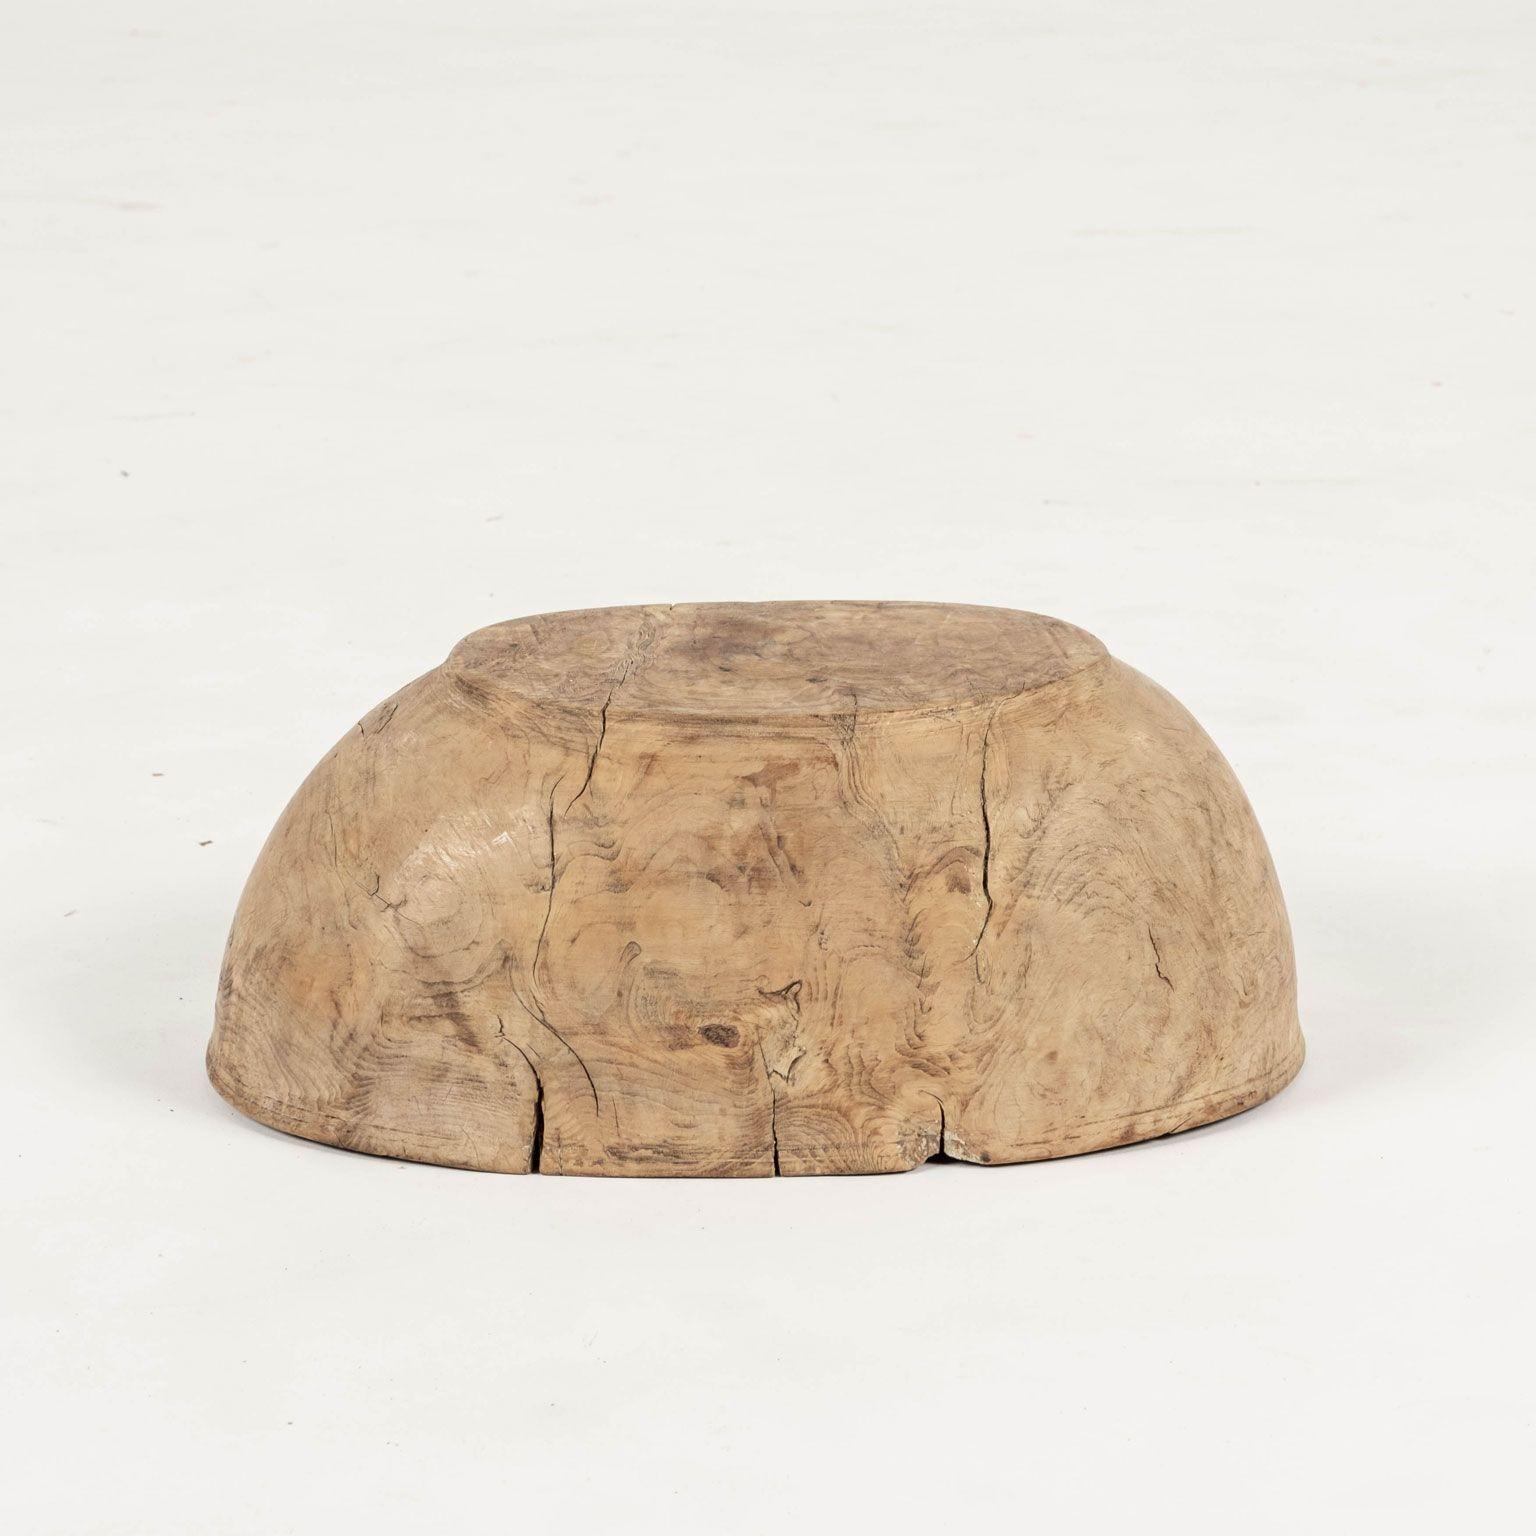 Primitive Mid-Brown Gorgeous Oval-Shaped Swedish Burl Root Wood Bowl For Sale